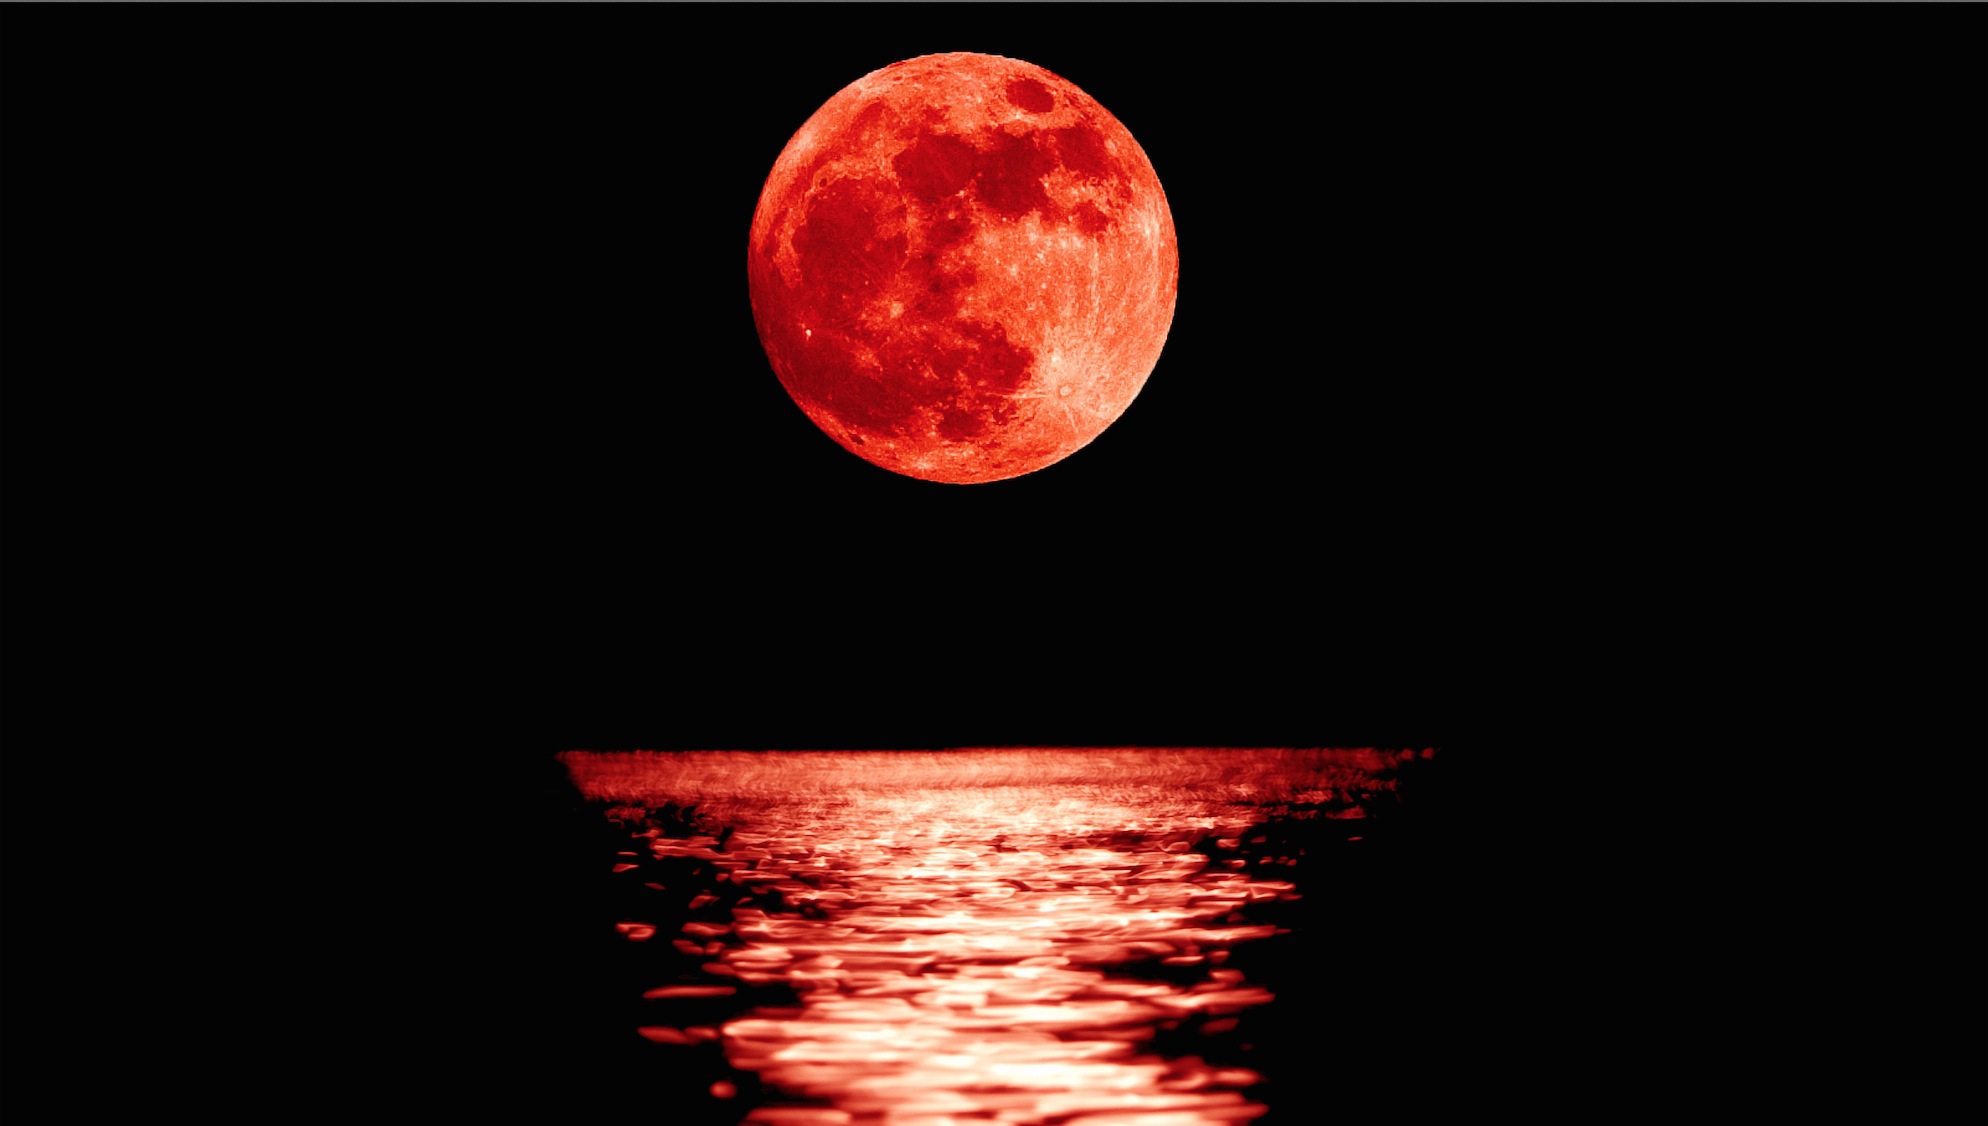 Blood Moon will be visible across much of the US tomorrow morning